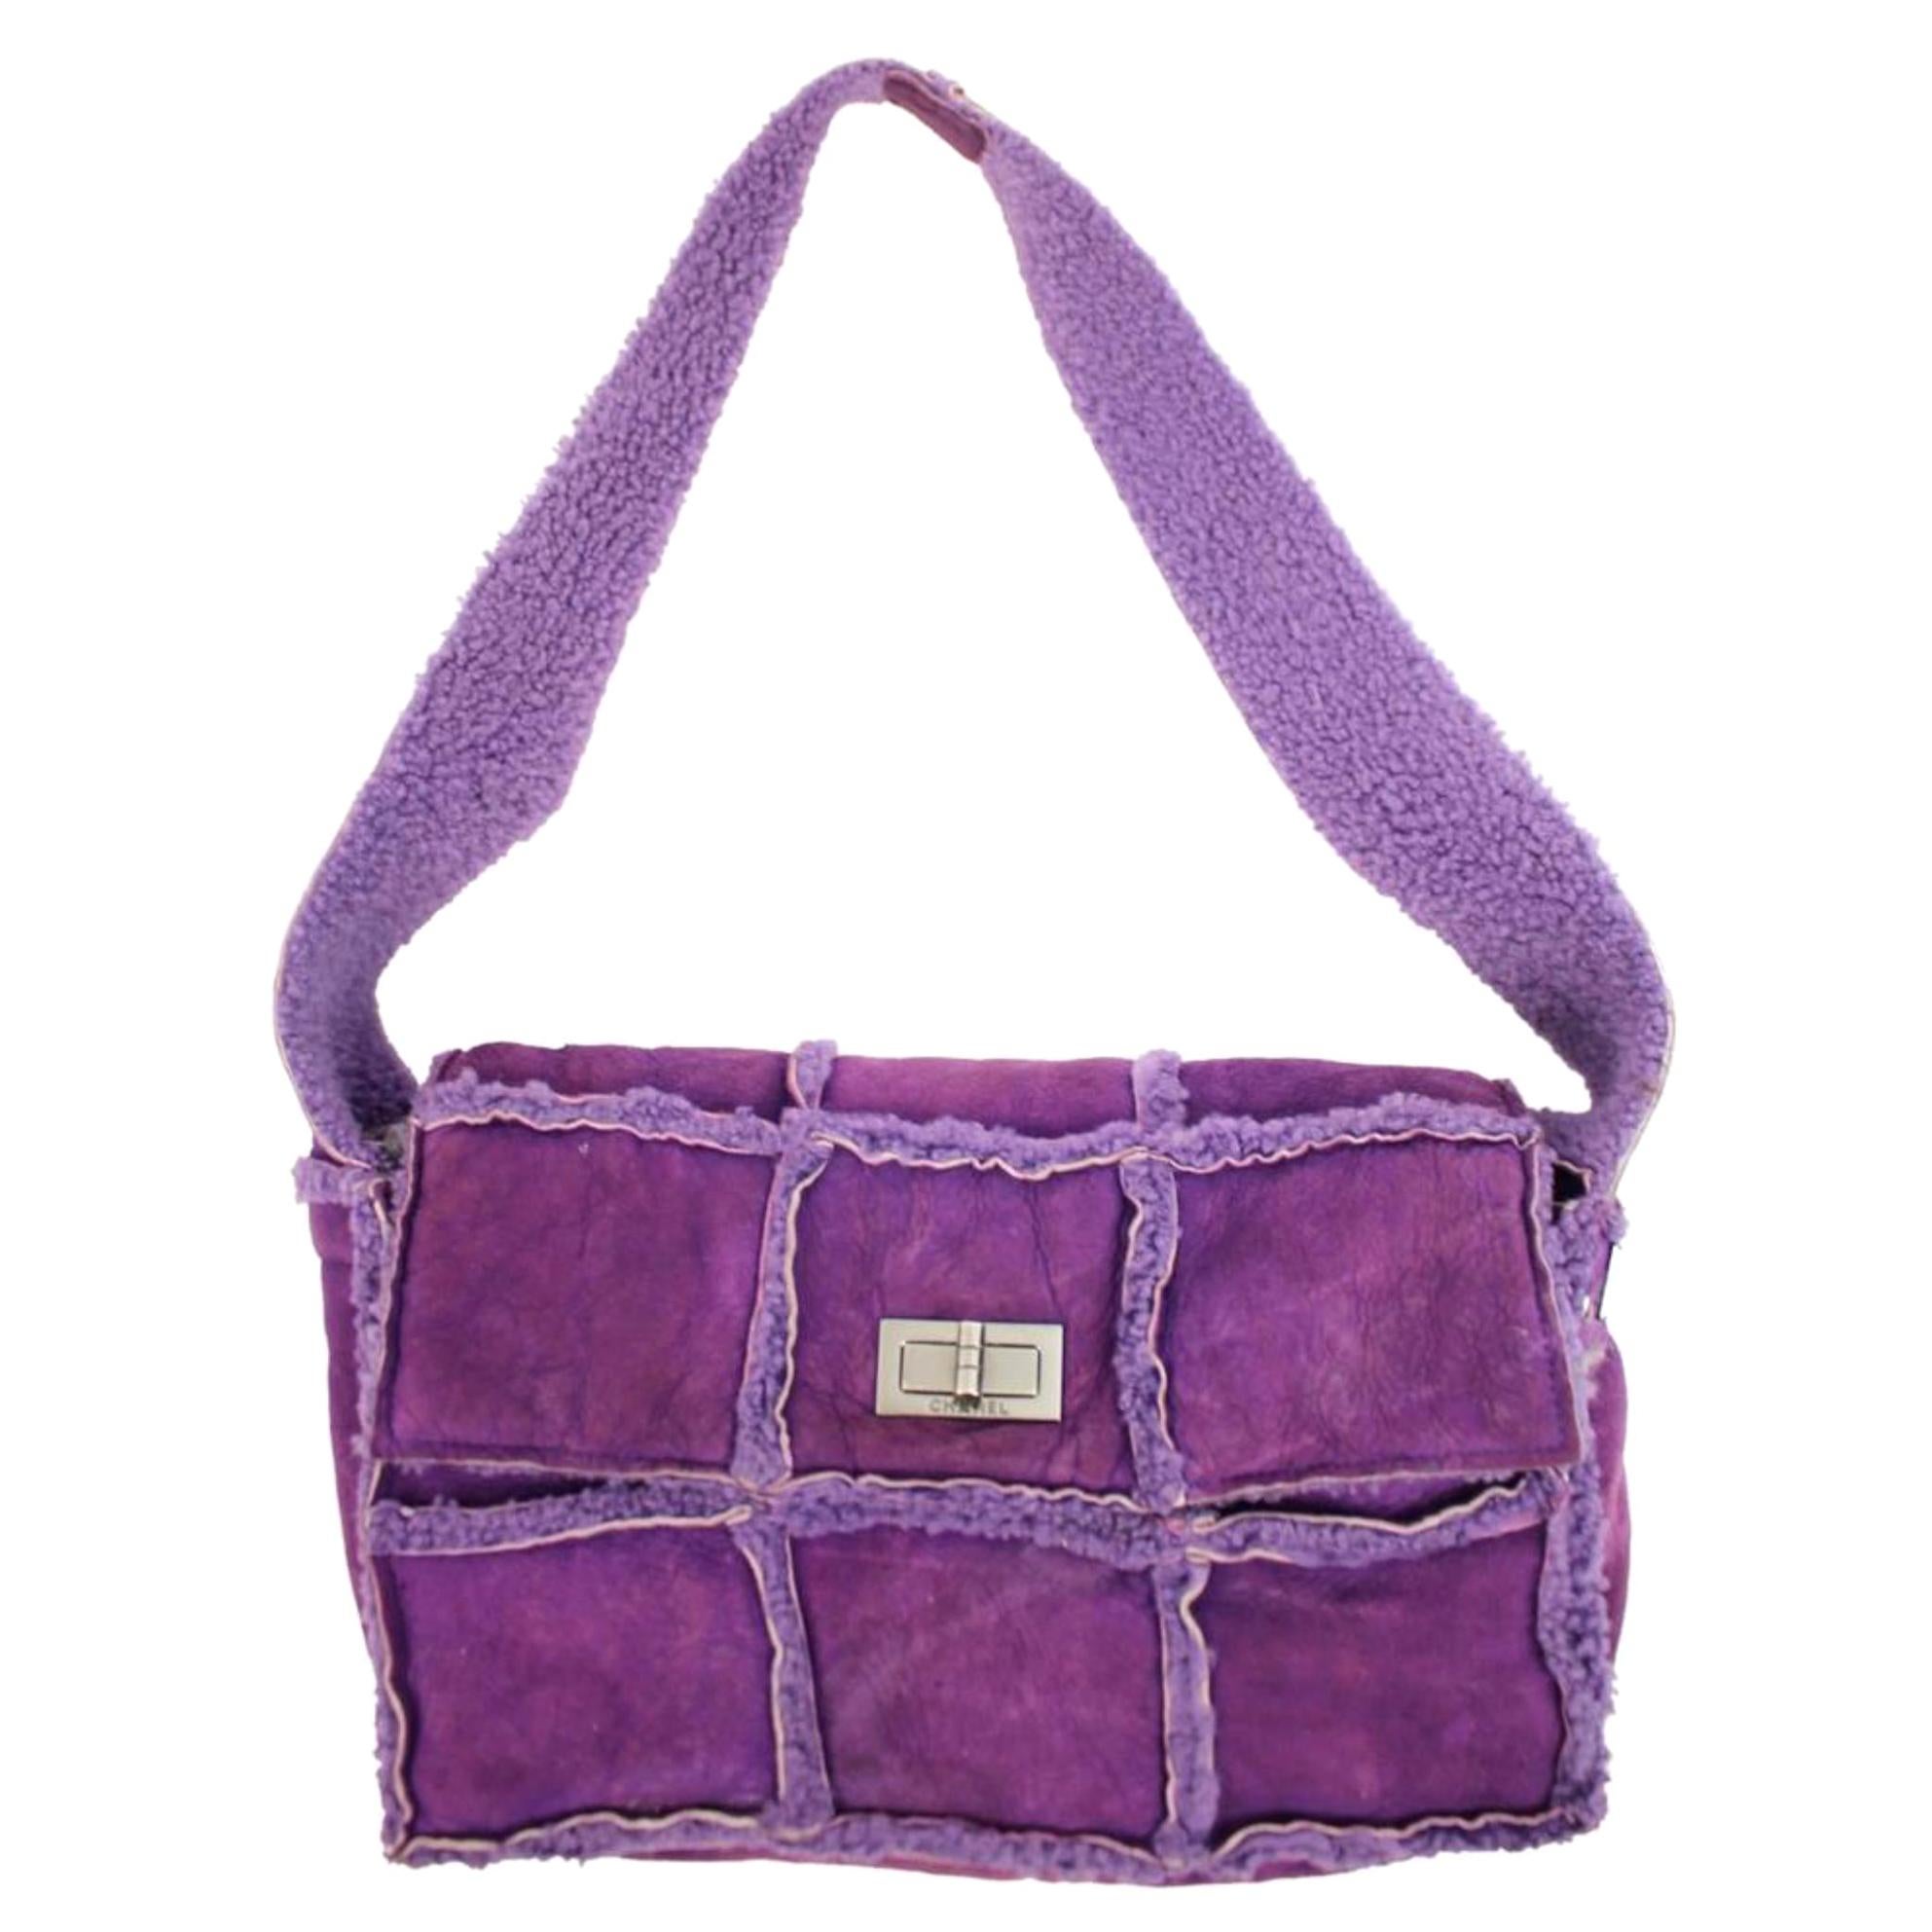 Chanel Classic Flap Shearling Ccty63 Purple Shoulder Bag For Sale